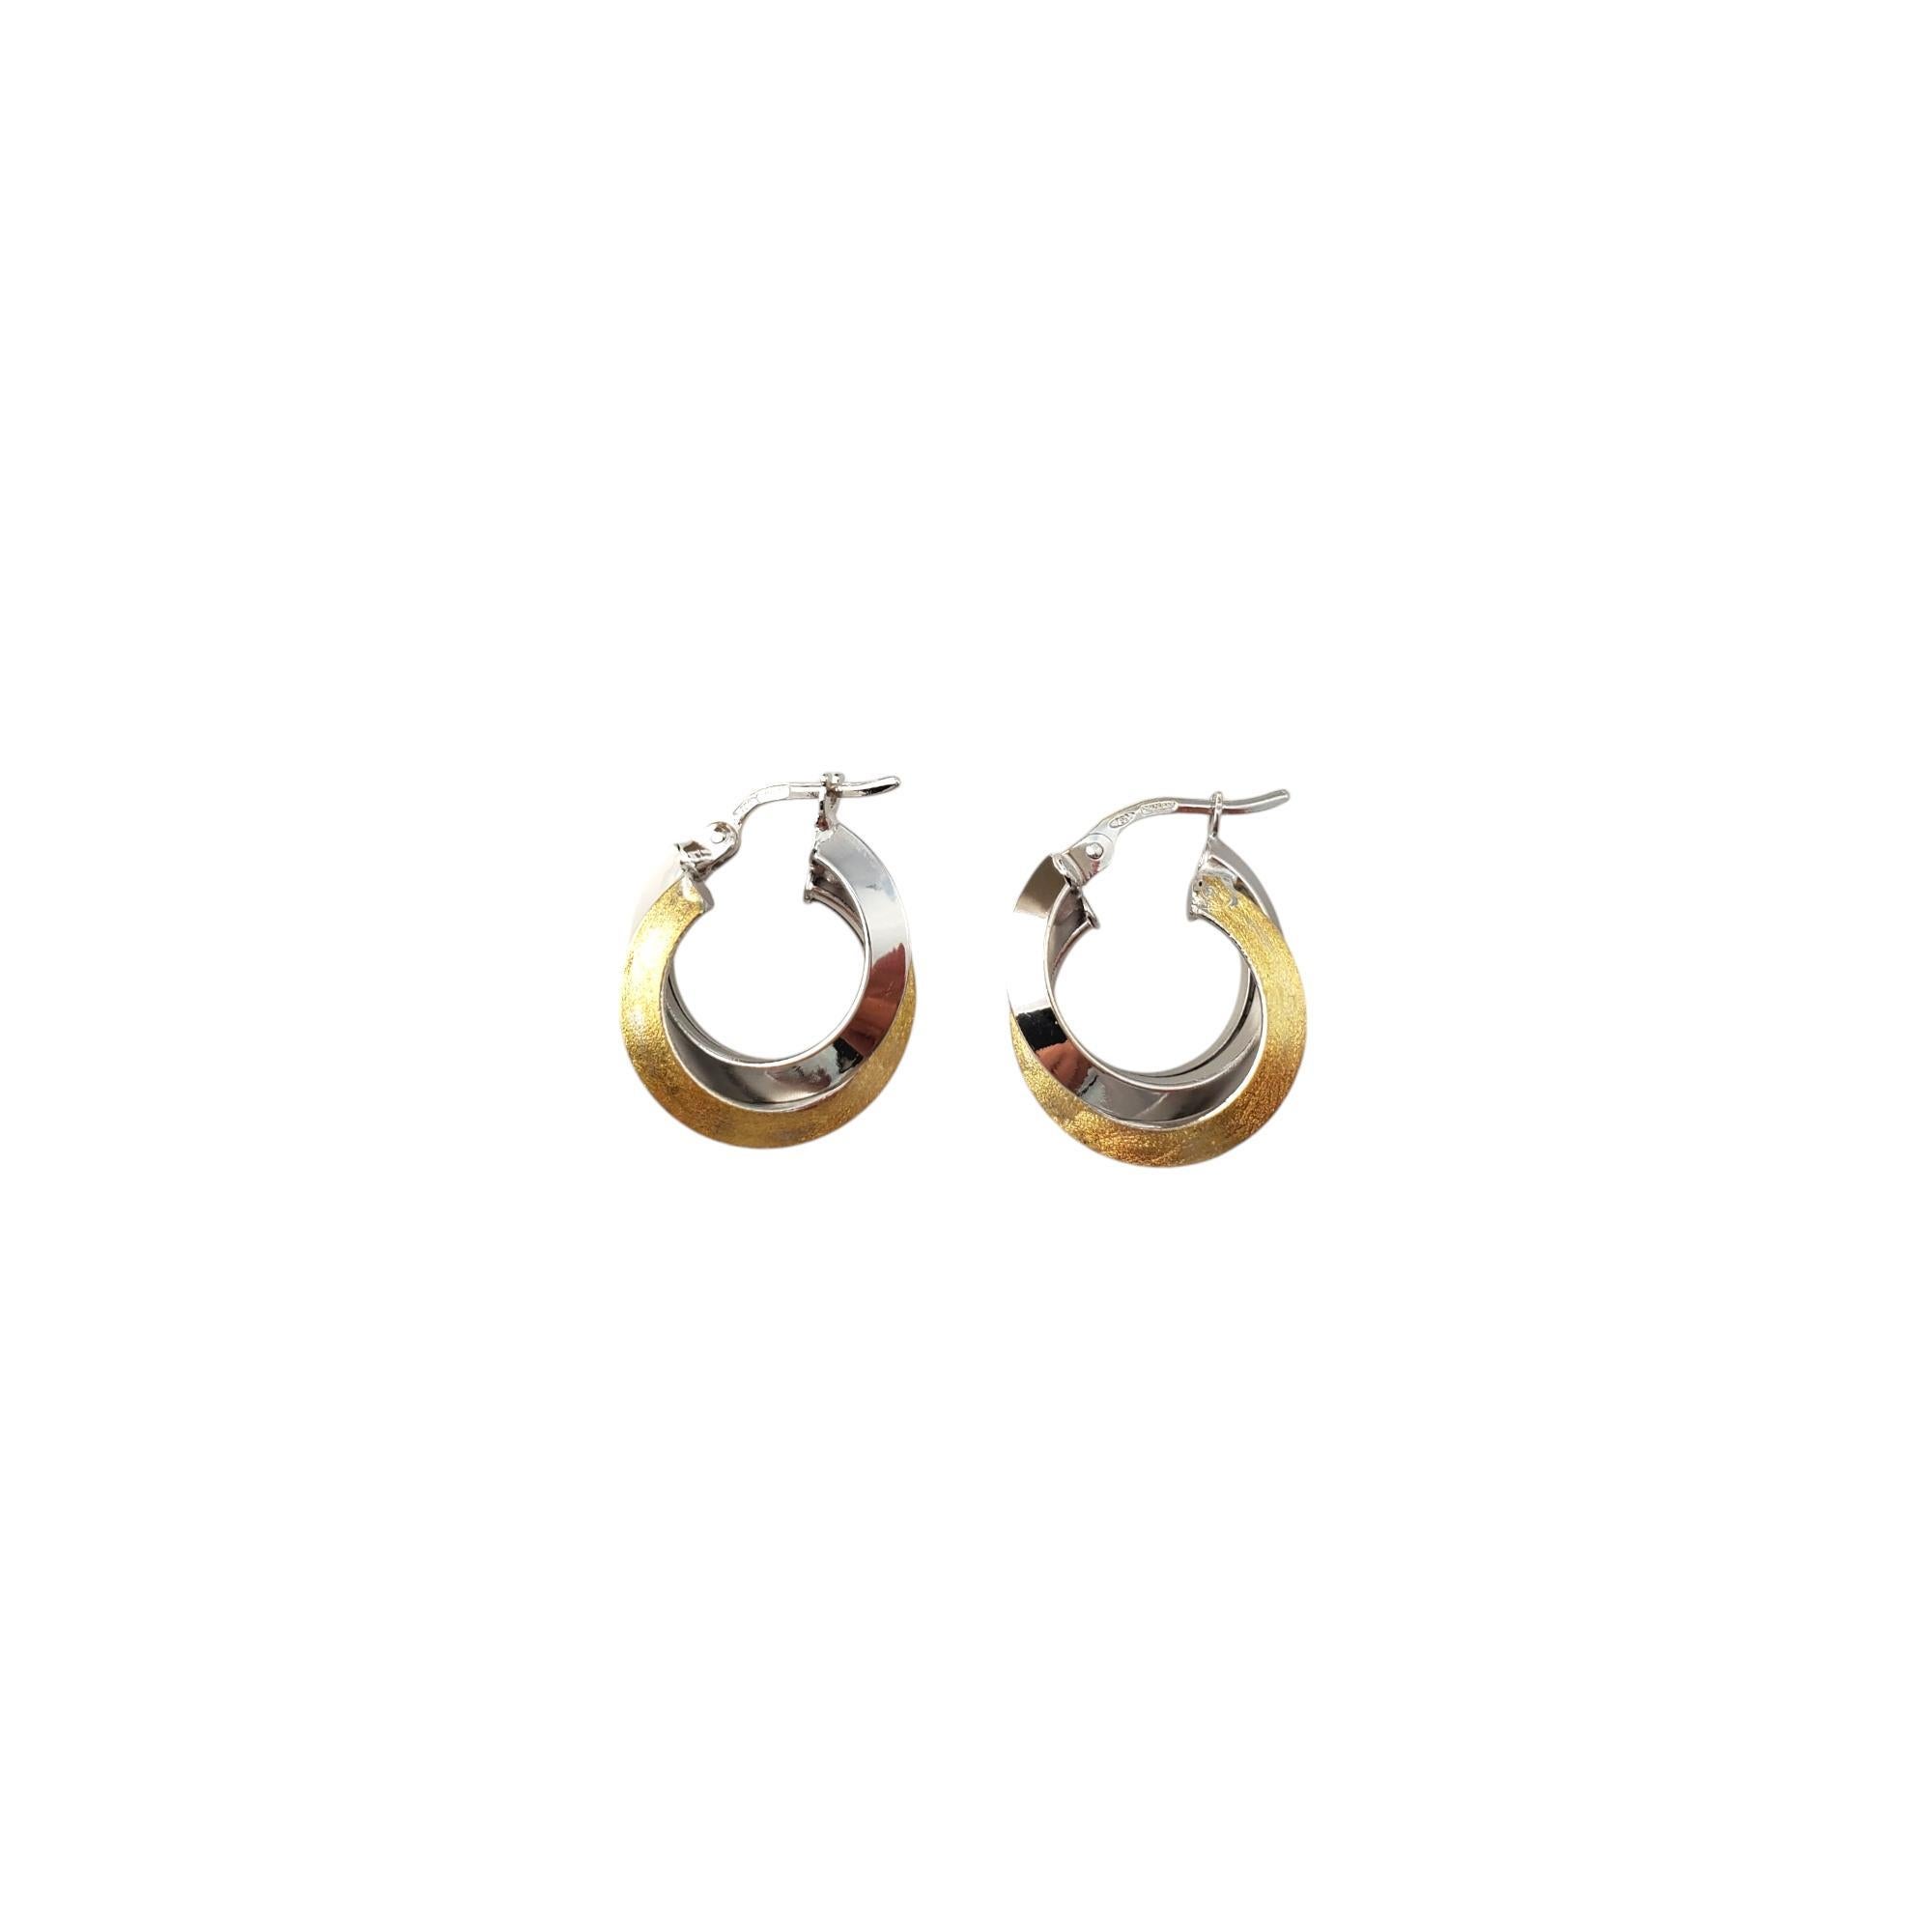 18K Two Tone Interlocking Circle Hoop Earrings -

These gorgeous earrings are set in white and yellow gold - a staple to any outfit.

Size: 19.2mm X 4.1mm X 4.8mm

Weight: 1.8dwt. / 2.8 gr.

Marked: 750

Very good condition, professionally